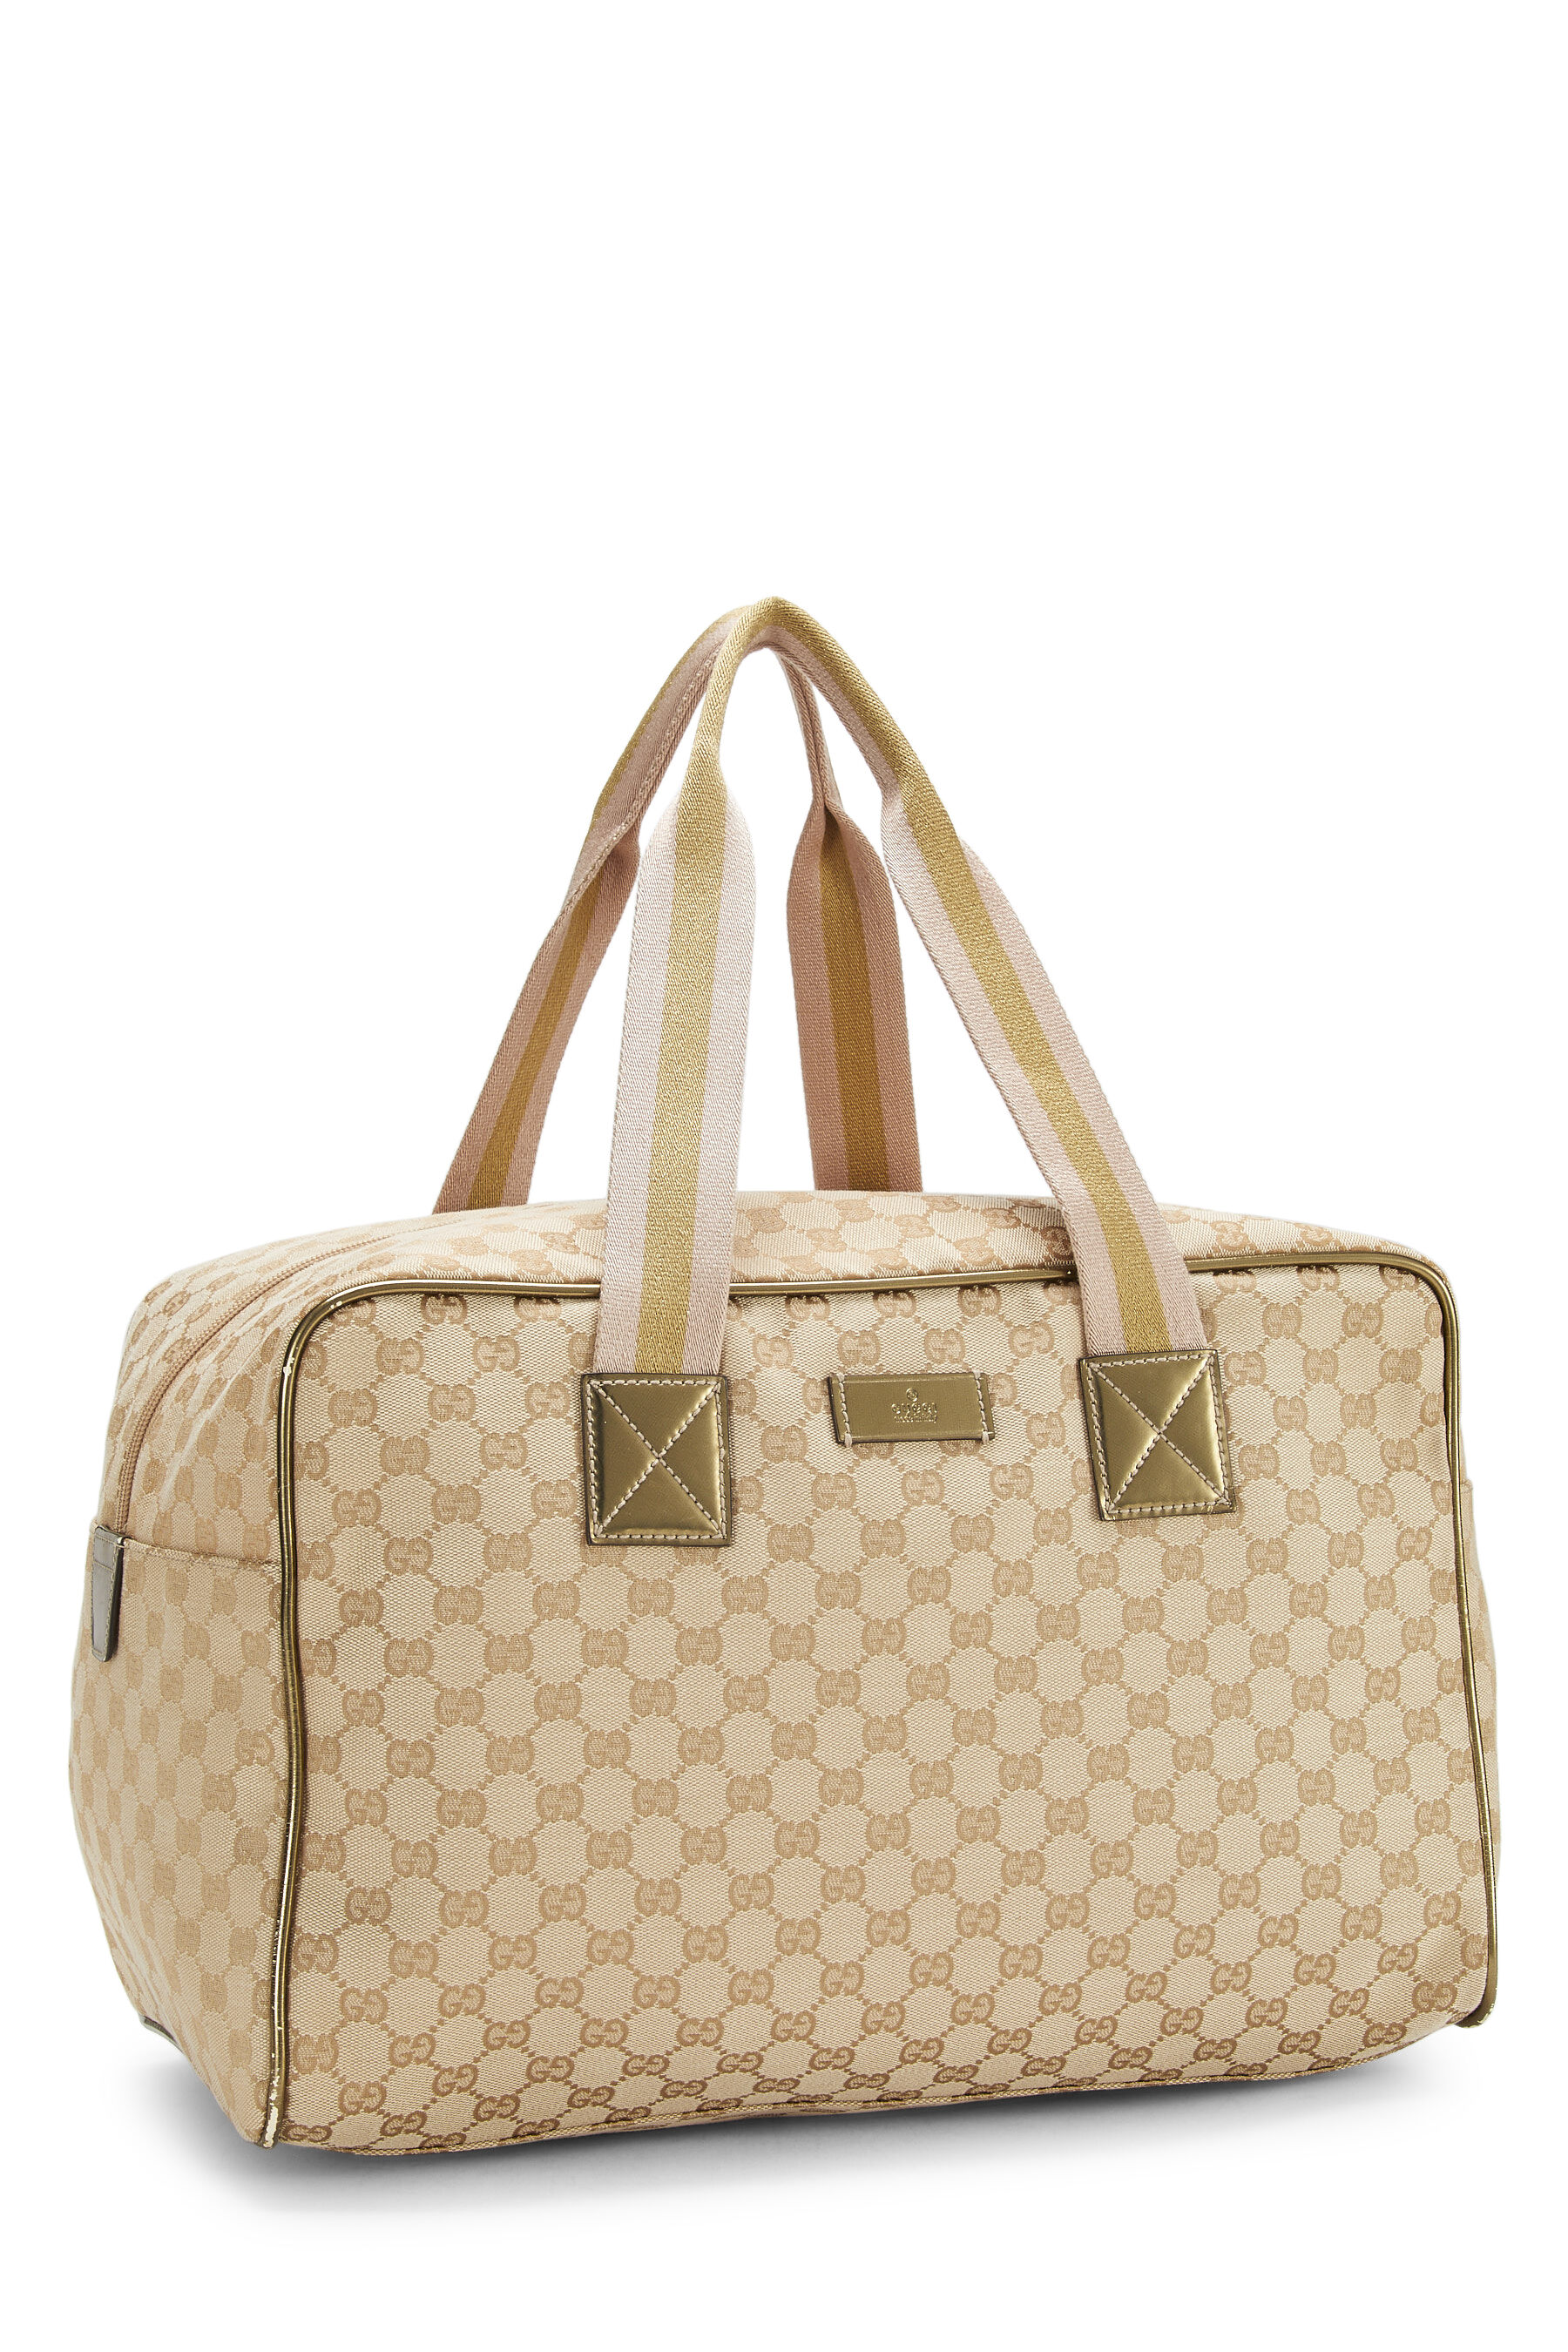 Gucci Original GG Canvas Soft Carry On Duffle Large QFB1EOJYD5001